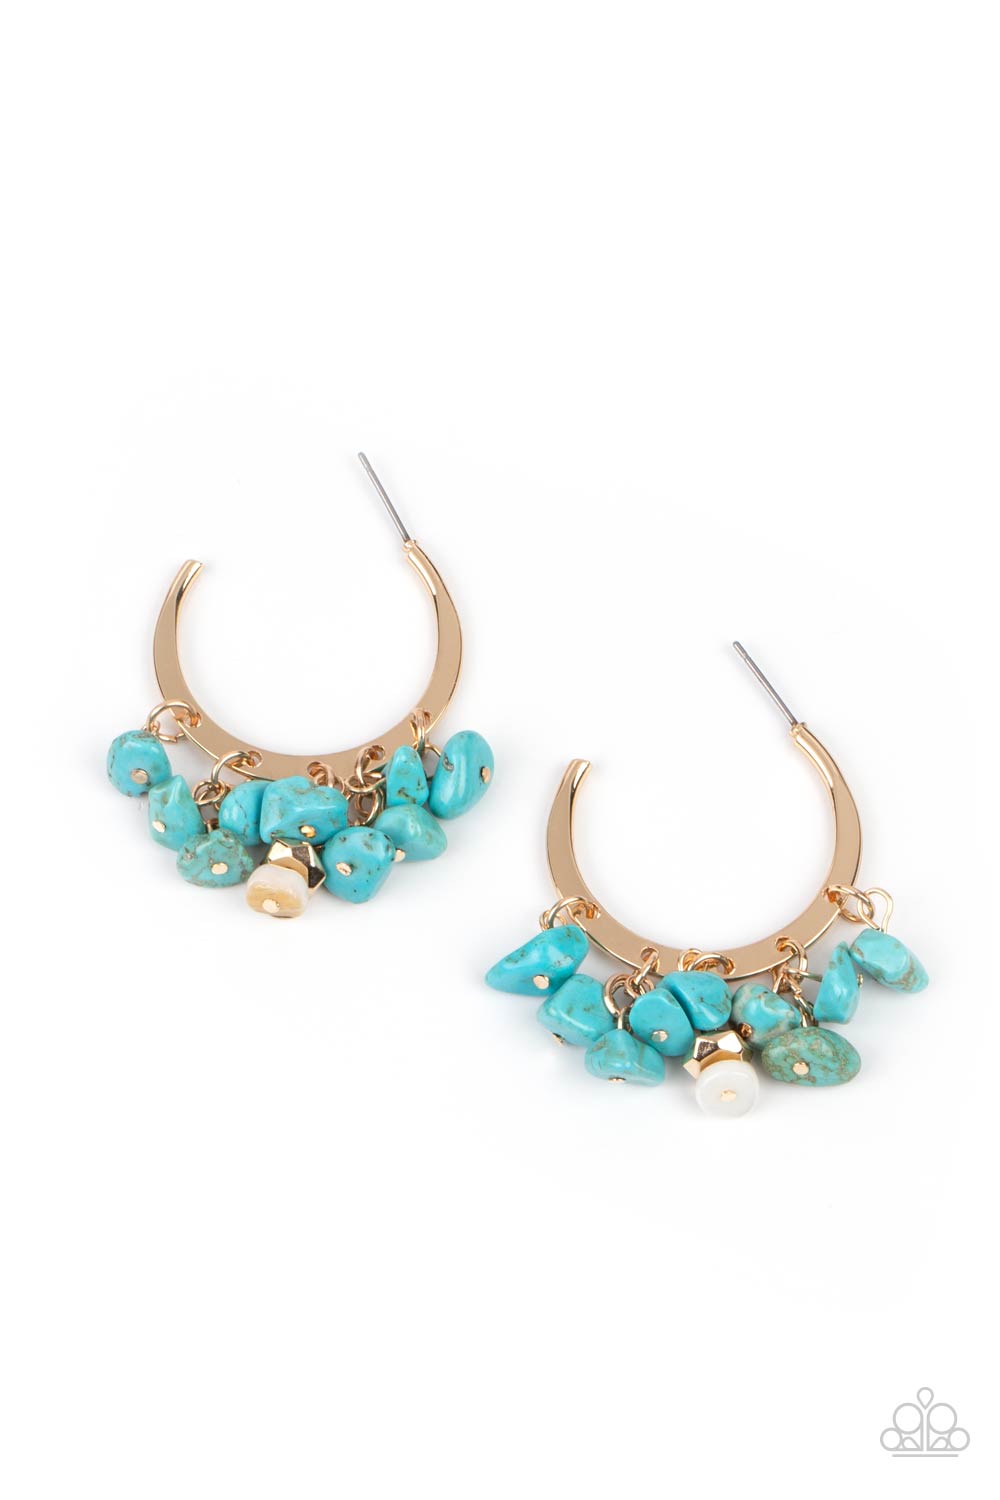 Gorgeously Grounding - Gold - Turquoise Hoop Earrings - Paparazzi Accessories - 
Clusters of turquoise pebbles swing from the bottom of a dainty gold hoop, creating an earthy fringe. A faceted gold and white stone bead swings from the center, adding an ethereal edge. Earring attaches to a standard post fitting. Hoop measures approximately 1 1/4" in diameter.
Sold as one pair of hoop earrings.
